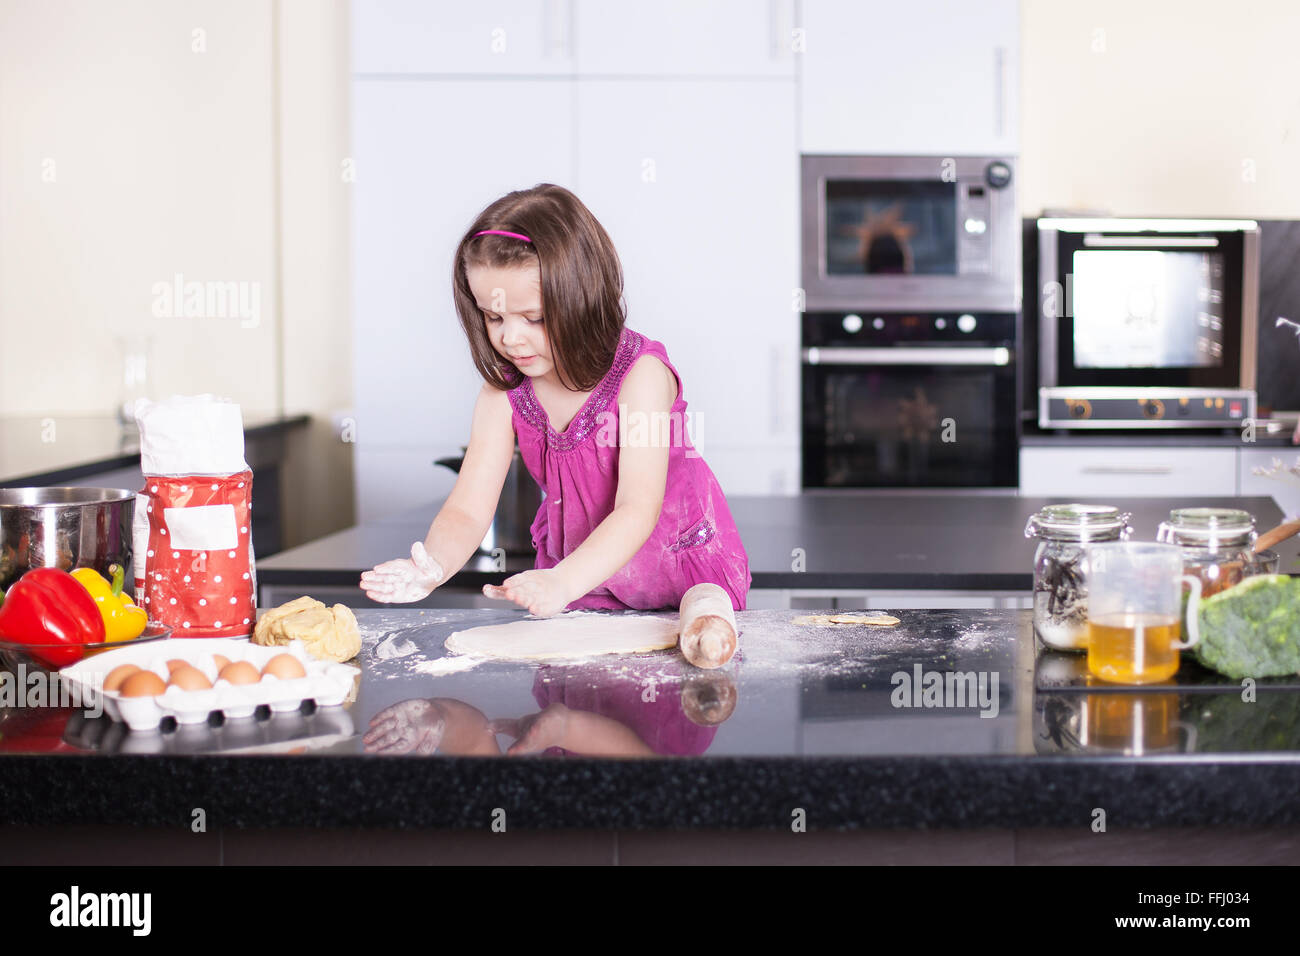 Girl cooks food in the kitchen at home. Little cook. stock image. Stock Photo